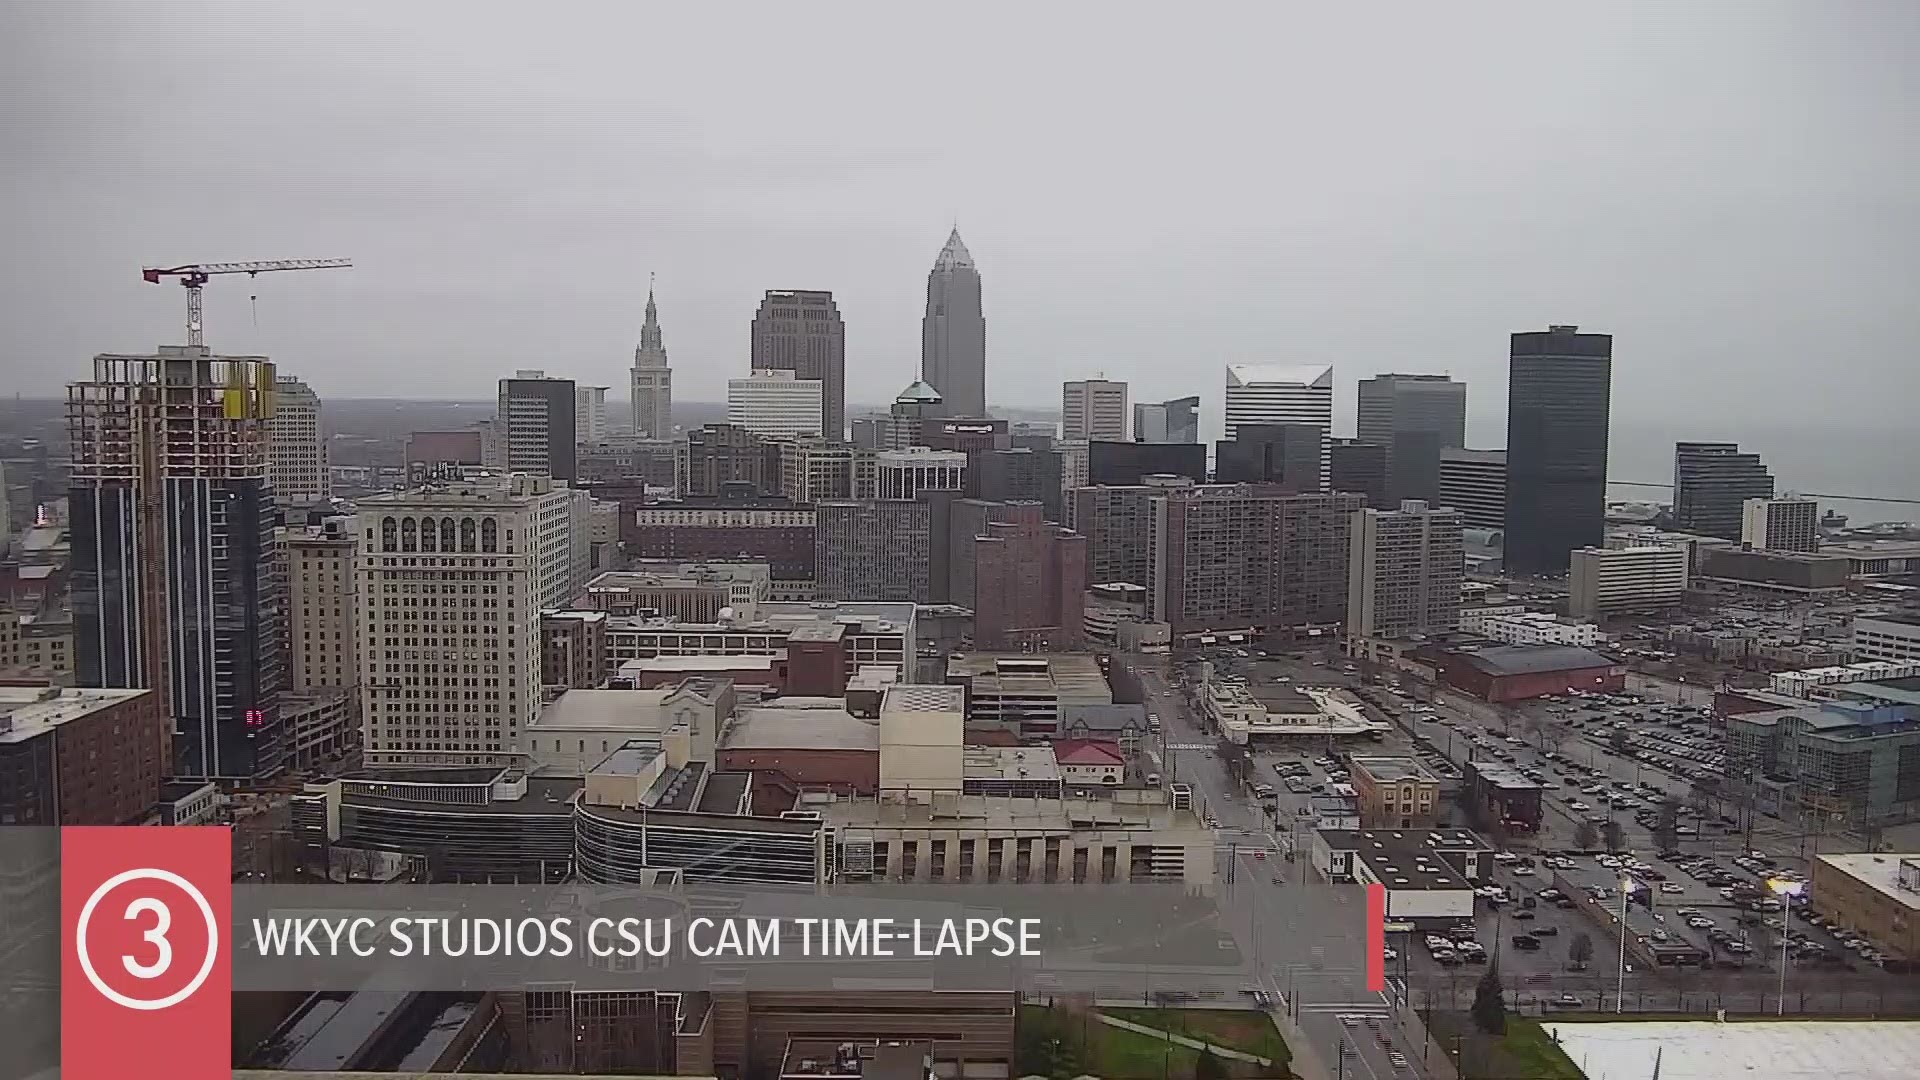 Plenty of clouds and plenty of rain to start our work week. Check out today's all-day weather time-lapse from the WKYC Studios CSU Cam. #3weather #wx @wkyc